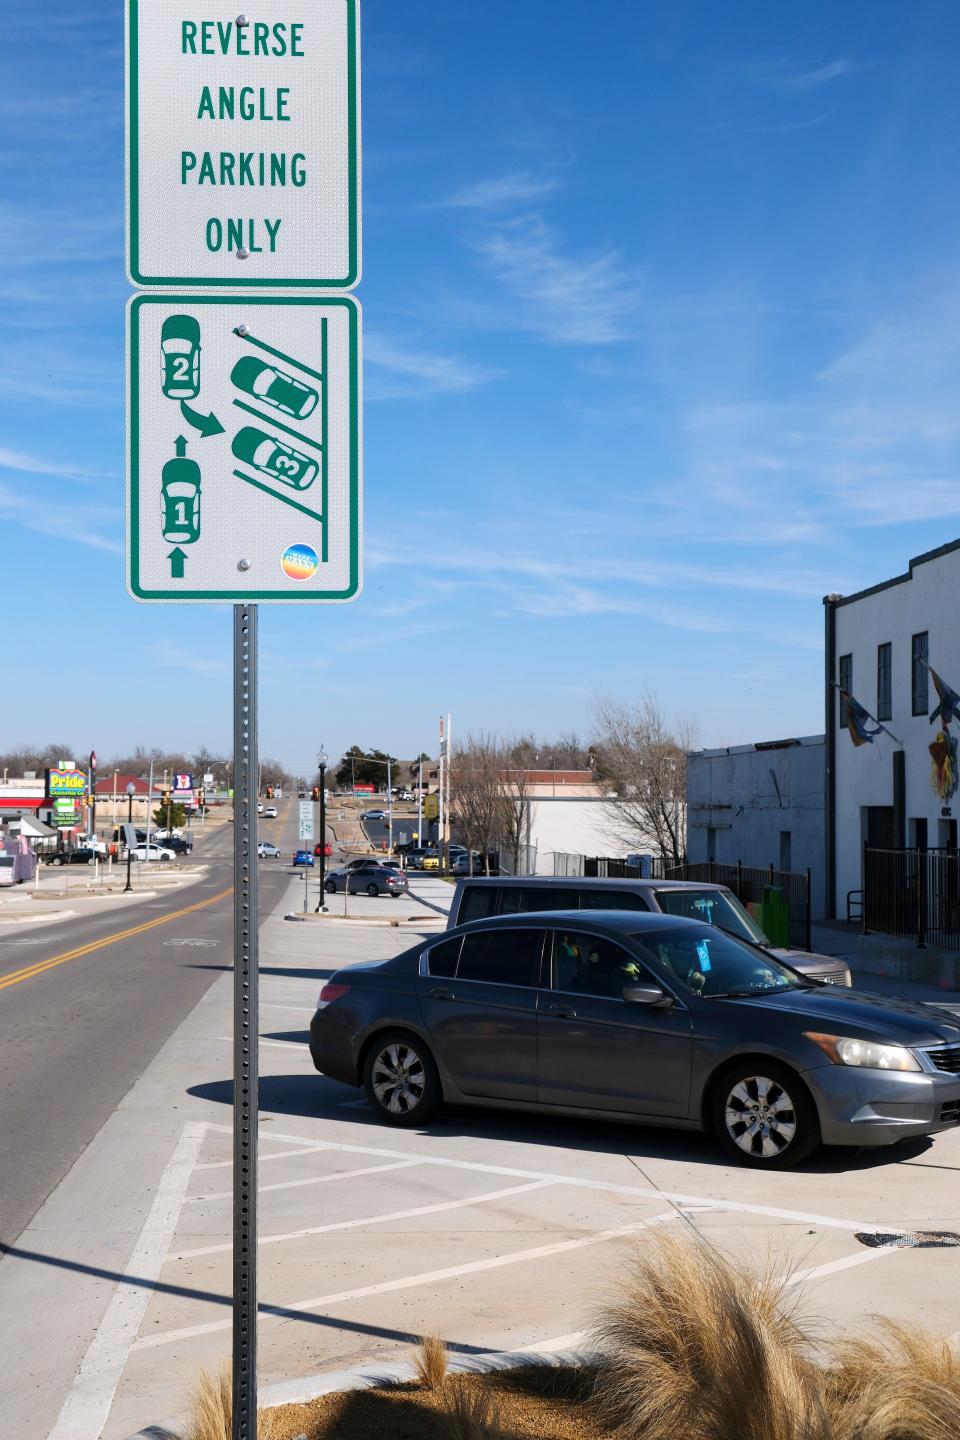 Cars are shown parked facing the curb earlier in the month, although signs in Oklahoma City's 39th Street District show that parking spots are intended for reverse-angle parking.